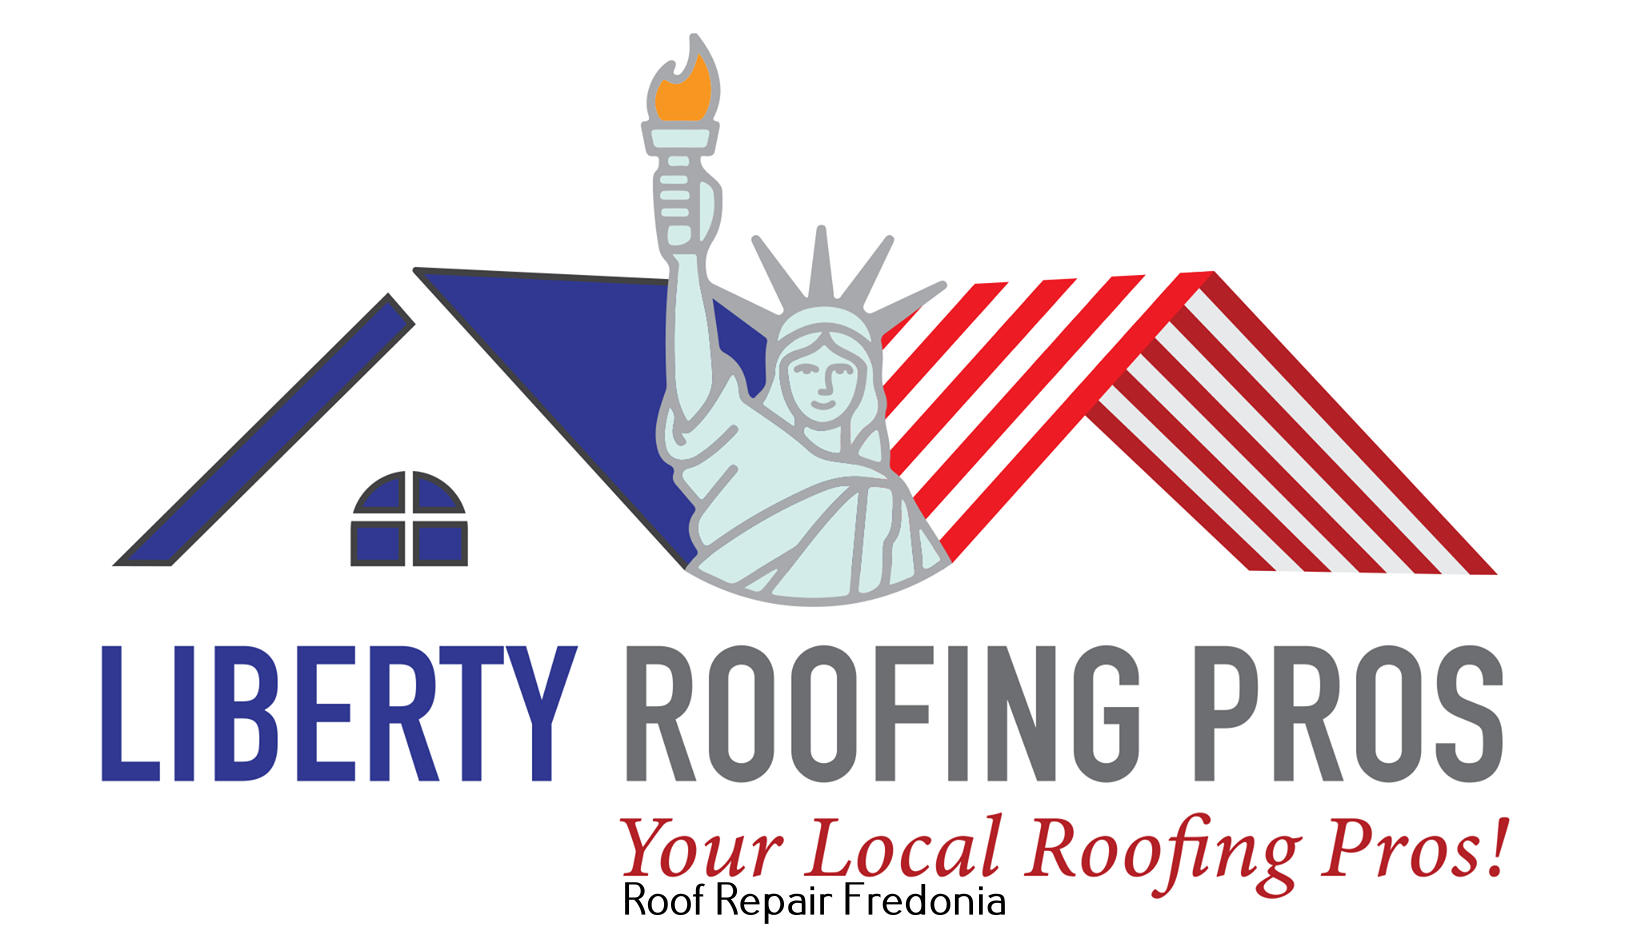 Liberty Roofing Pros LLC Offers the Best Roofing Services Possible